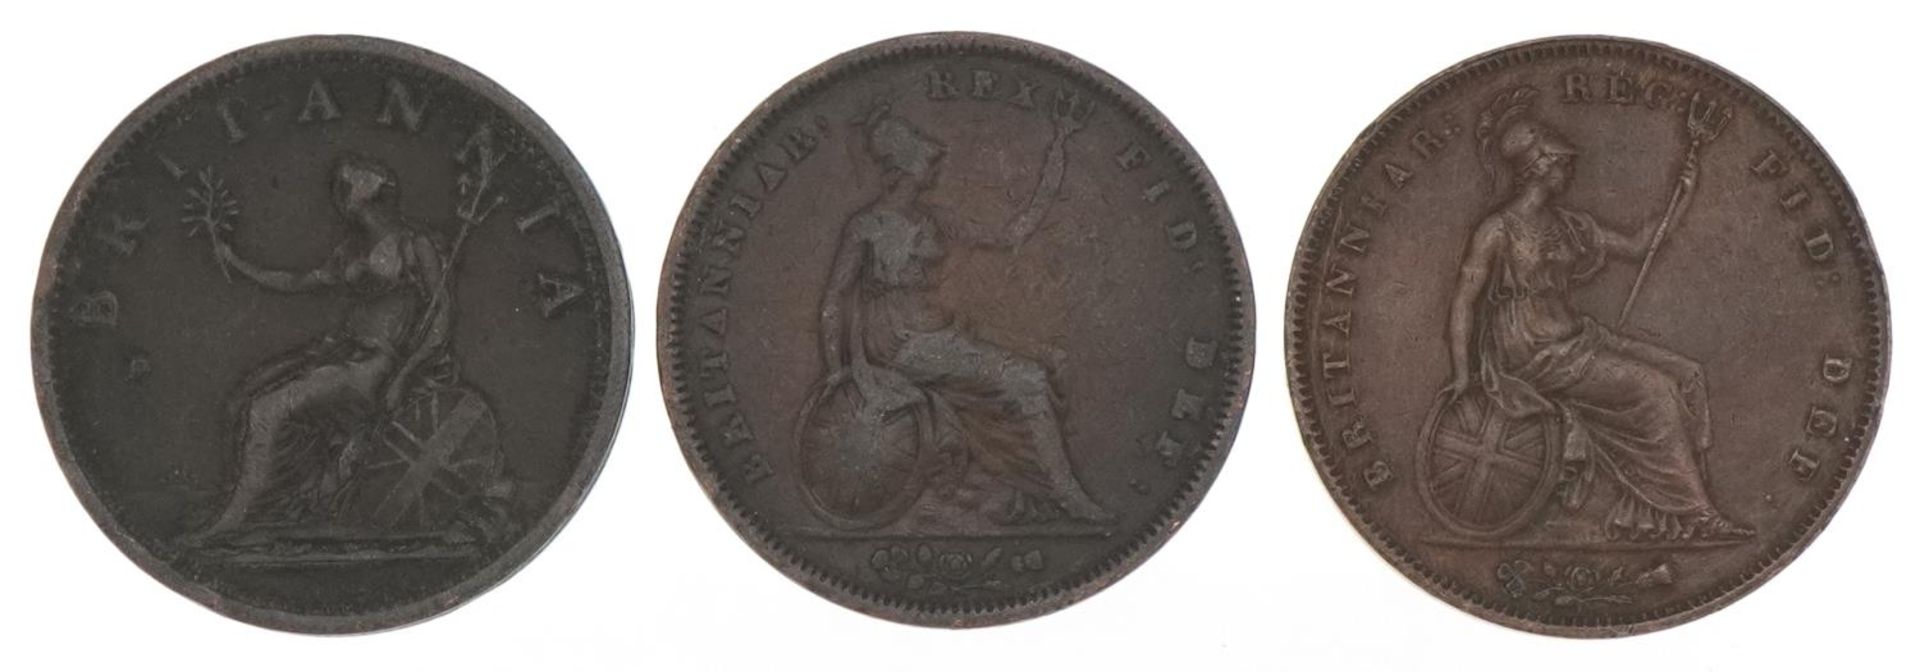 George III 1806 penny, William III 1831 penny and Queen Victoria 1853 penny - Image 2 of 2